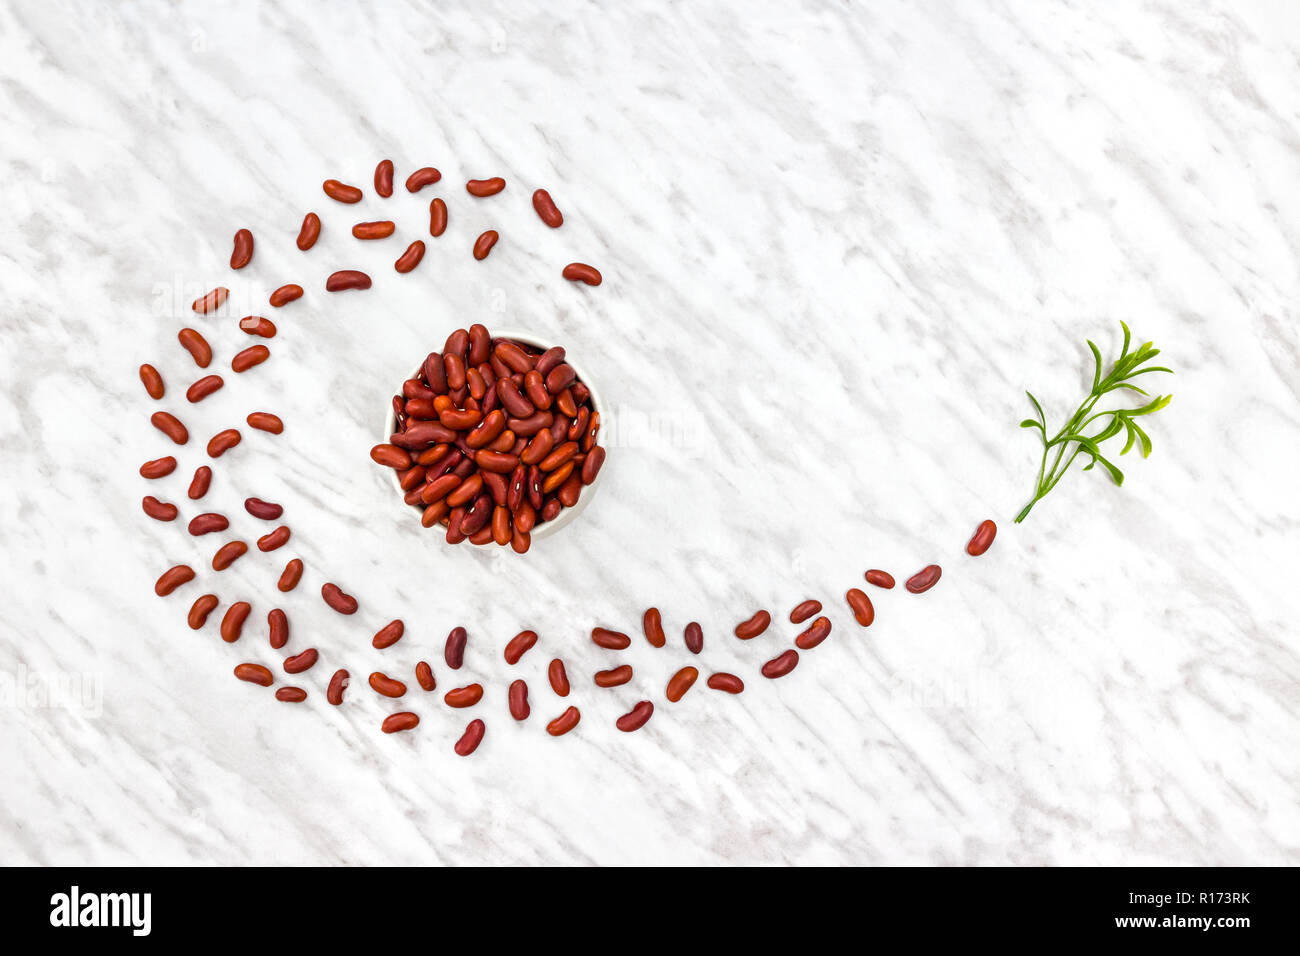 Styled red kidney beans on white marble background. Cooking ingredients. Stock Photo